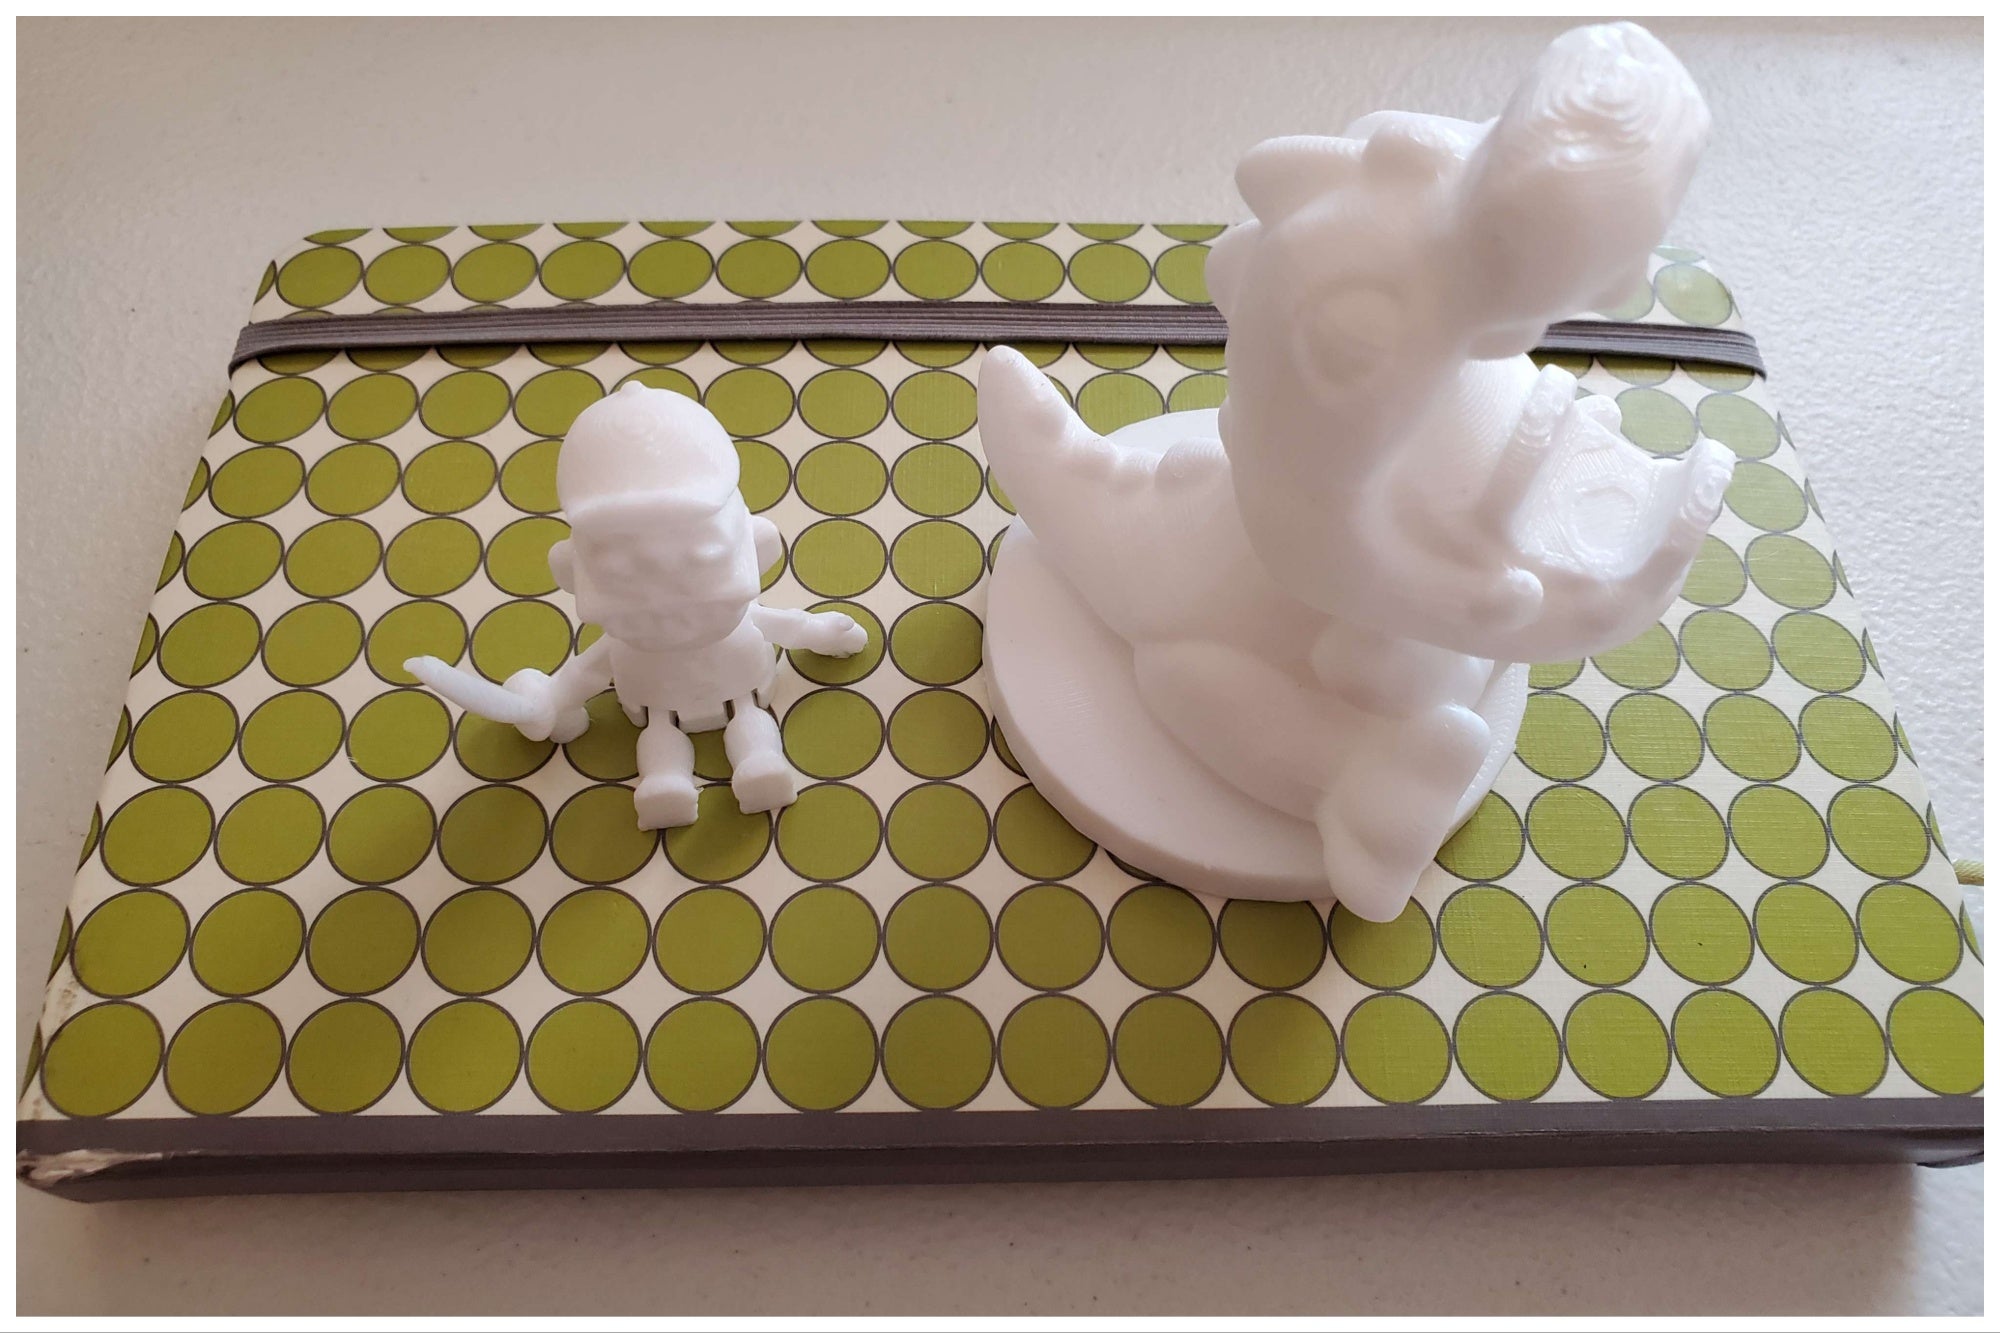 Two coconut white Toybox 3D printer figures on a green notebook